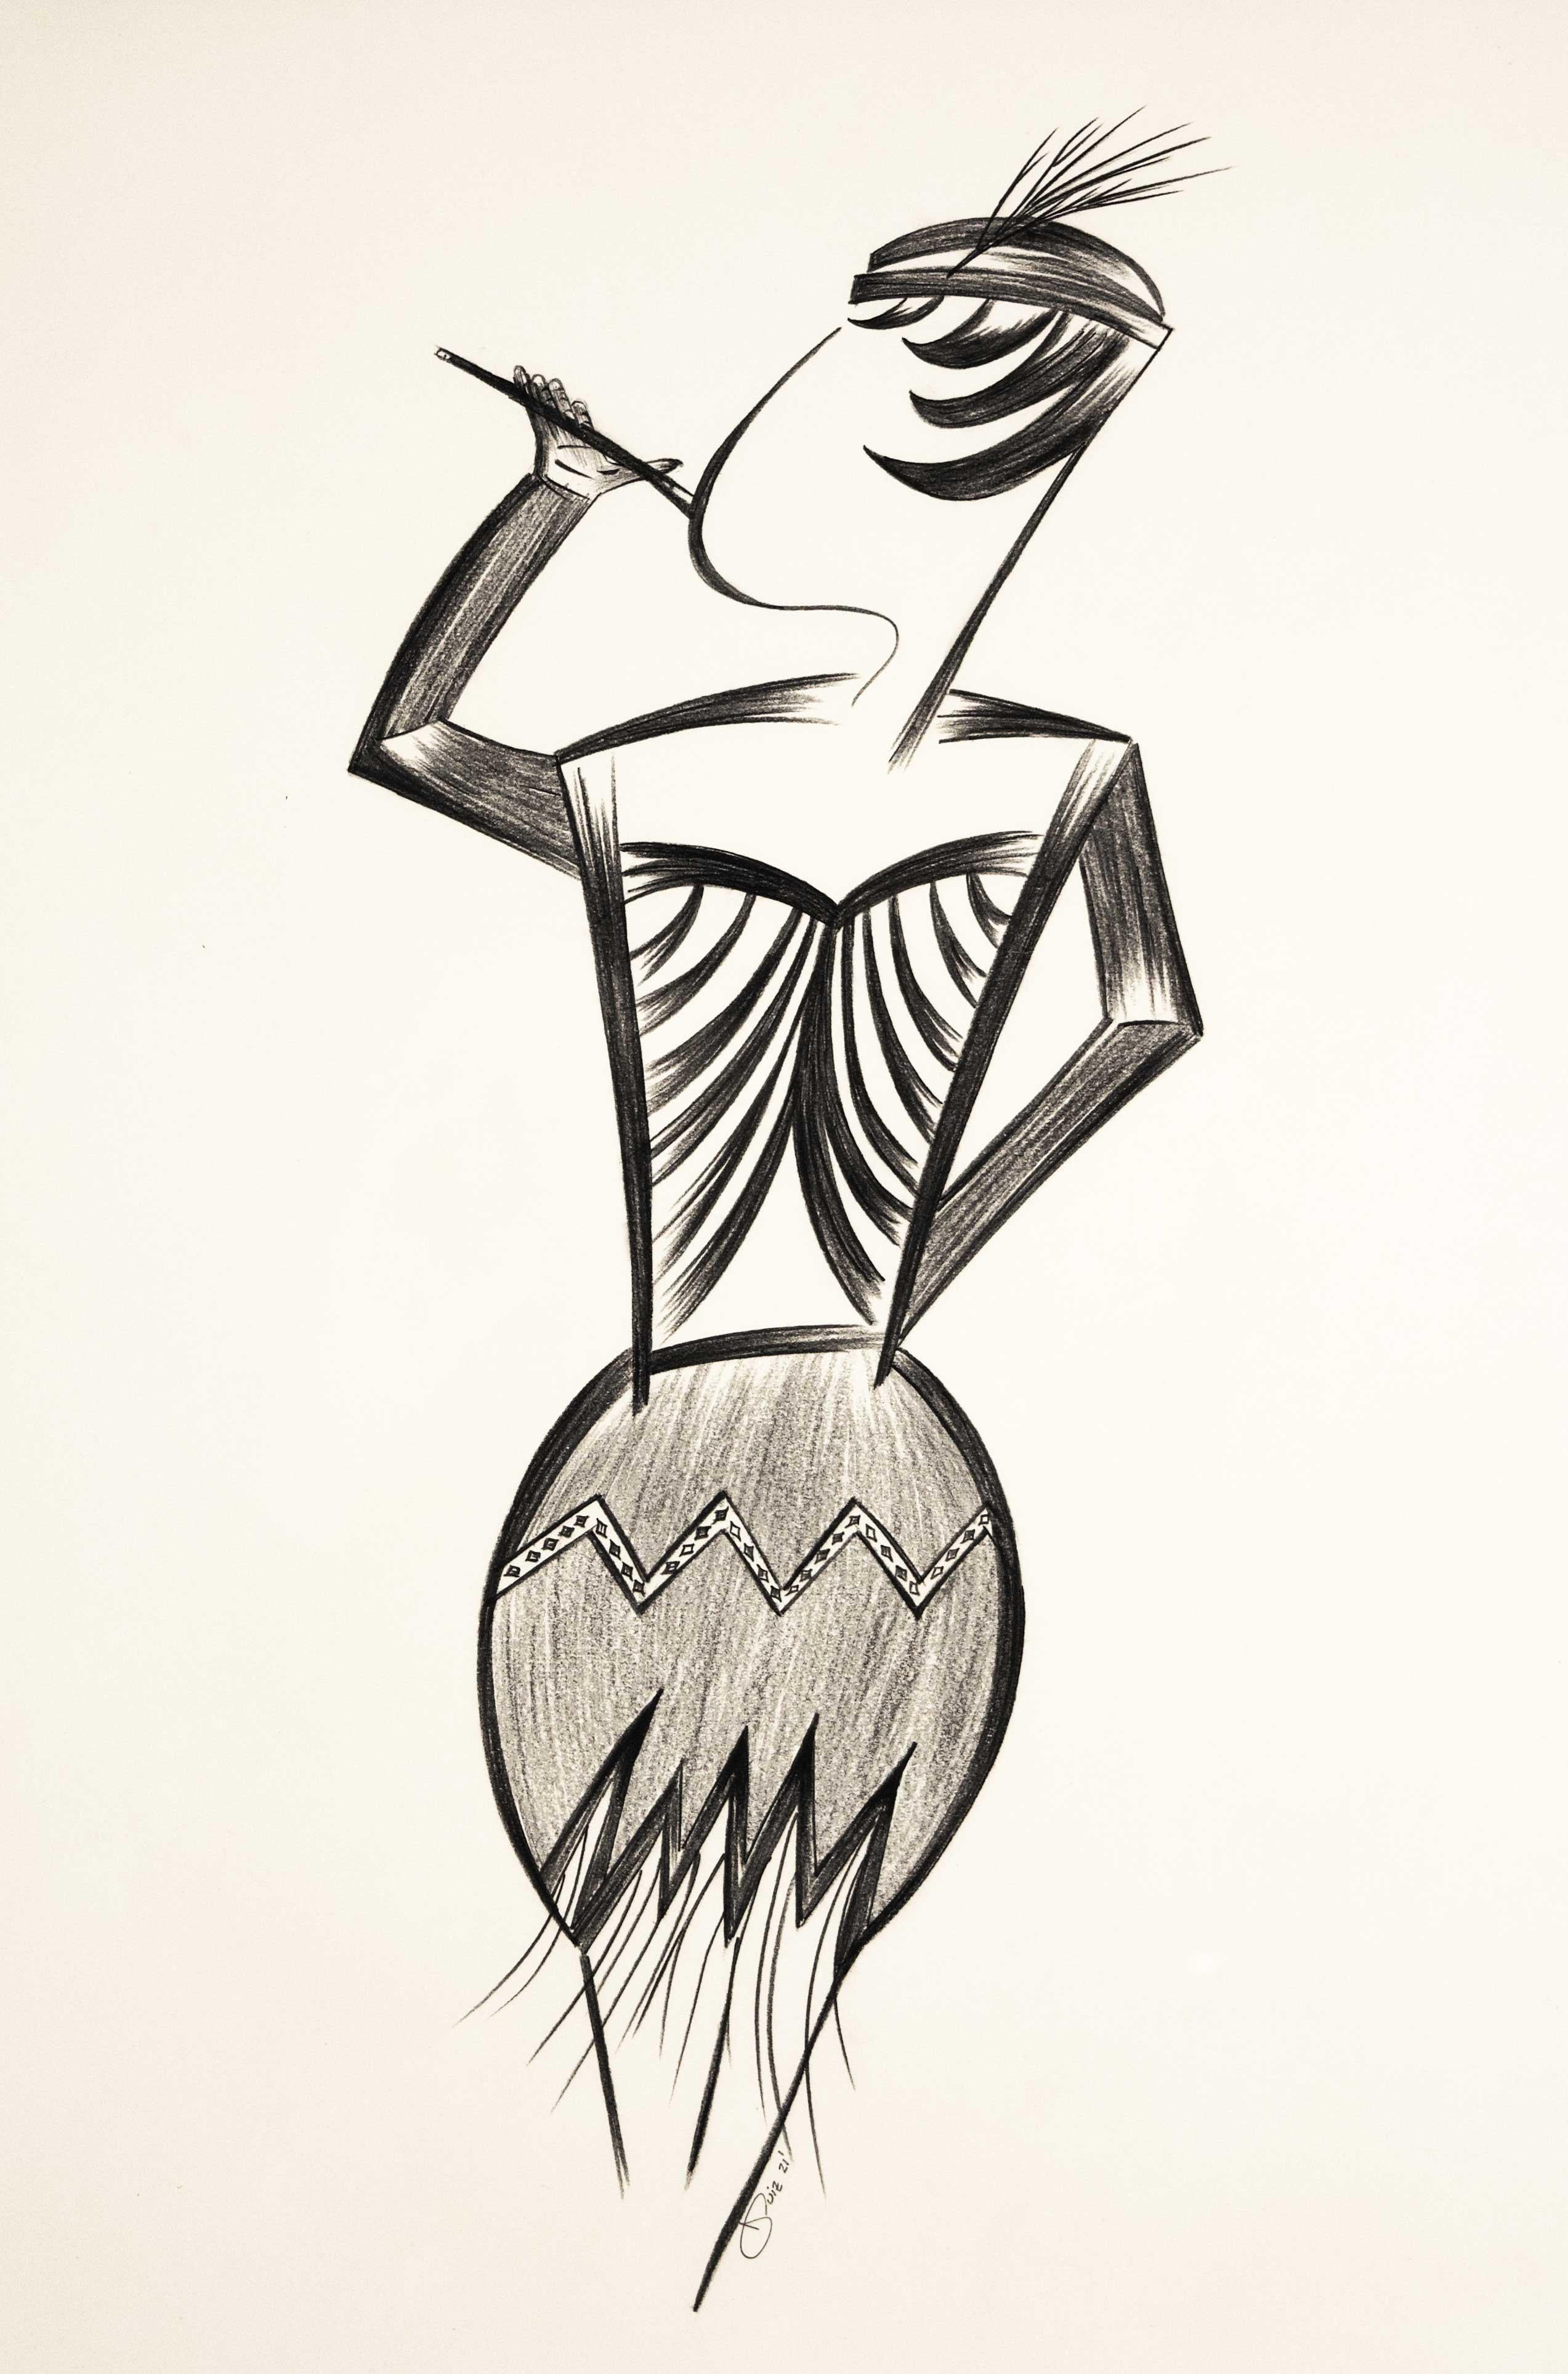 '1920s Flapper Fashion Rendition' is an original drawing by the American artist Jorge Ruiz-Martinez. The artist works in an art deco style, imagining graceful figures in historic costume through that stylized lens. Art Deco architecture and graphic